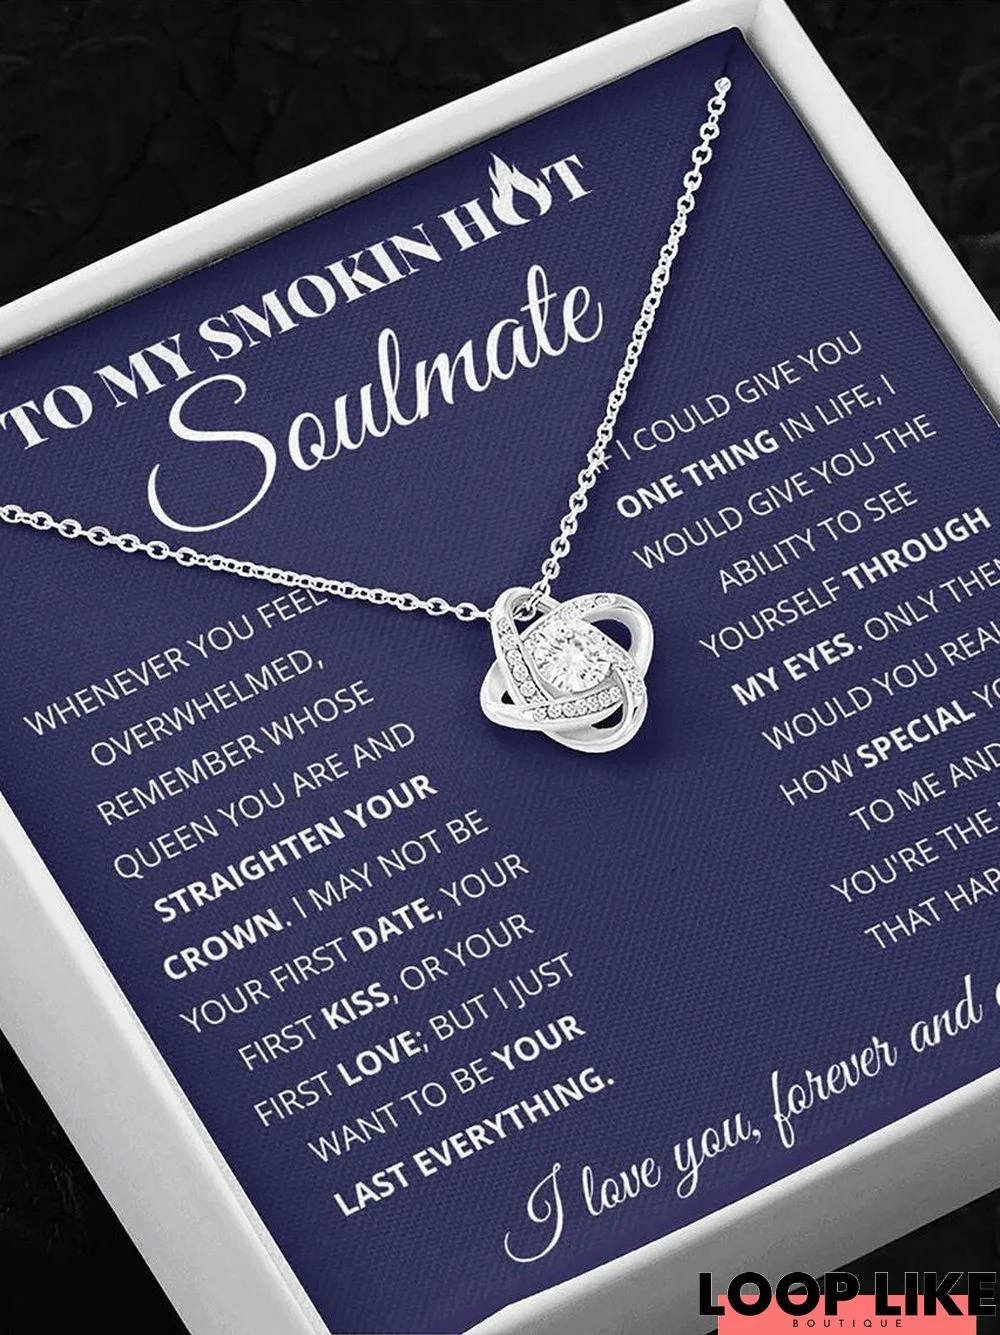 "You Are My Soulmate" Silver Diamond Clover Pendant Necklace Greeting Card Set Valentine's Day Jewelry Gift